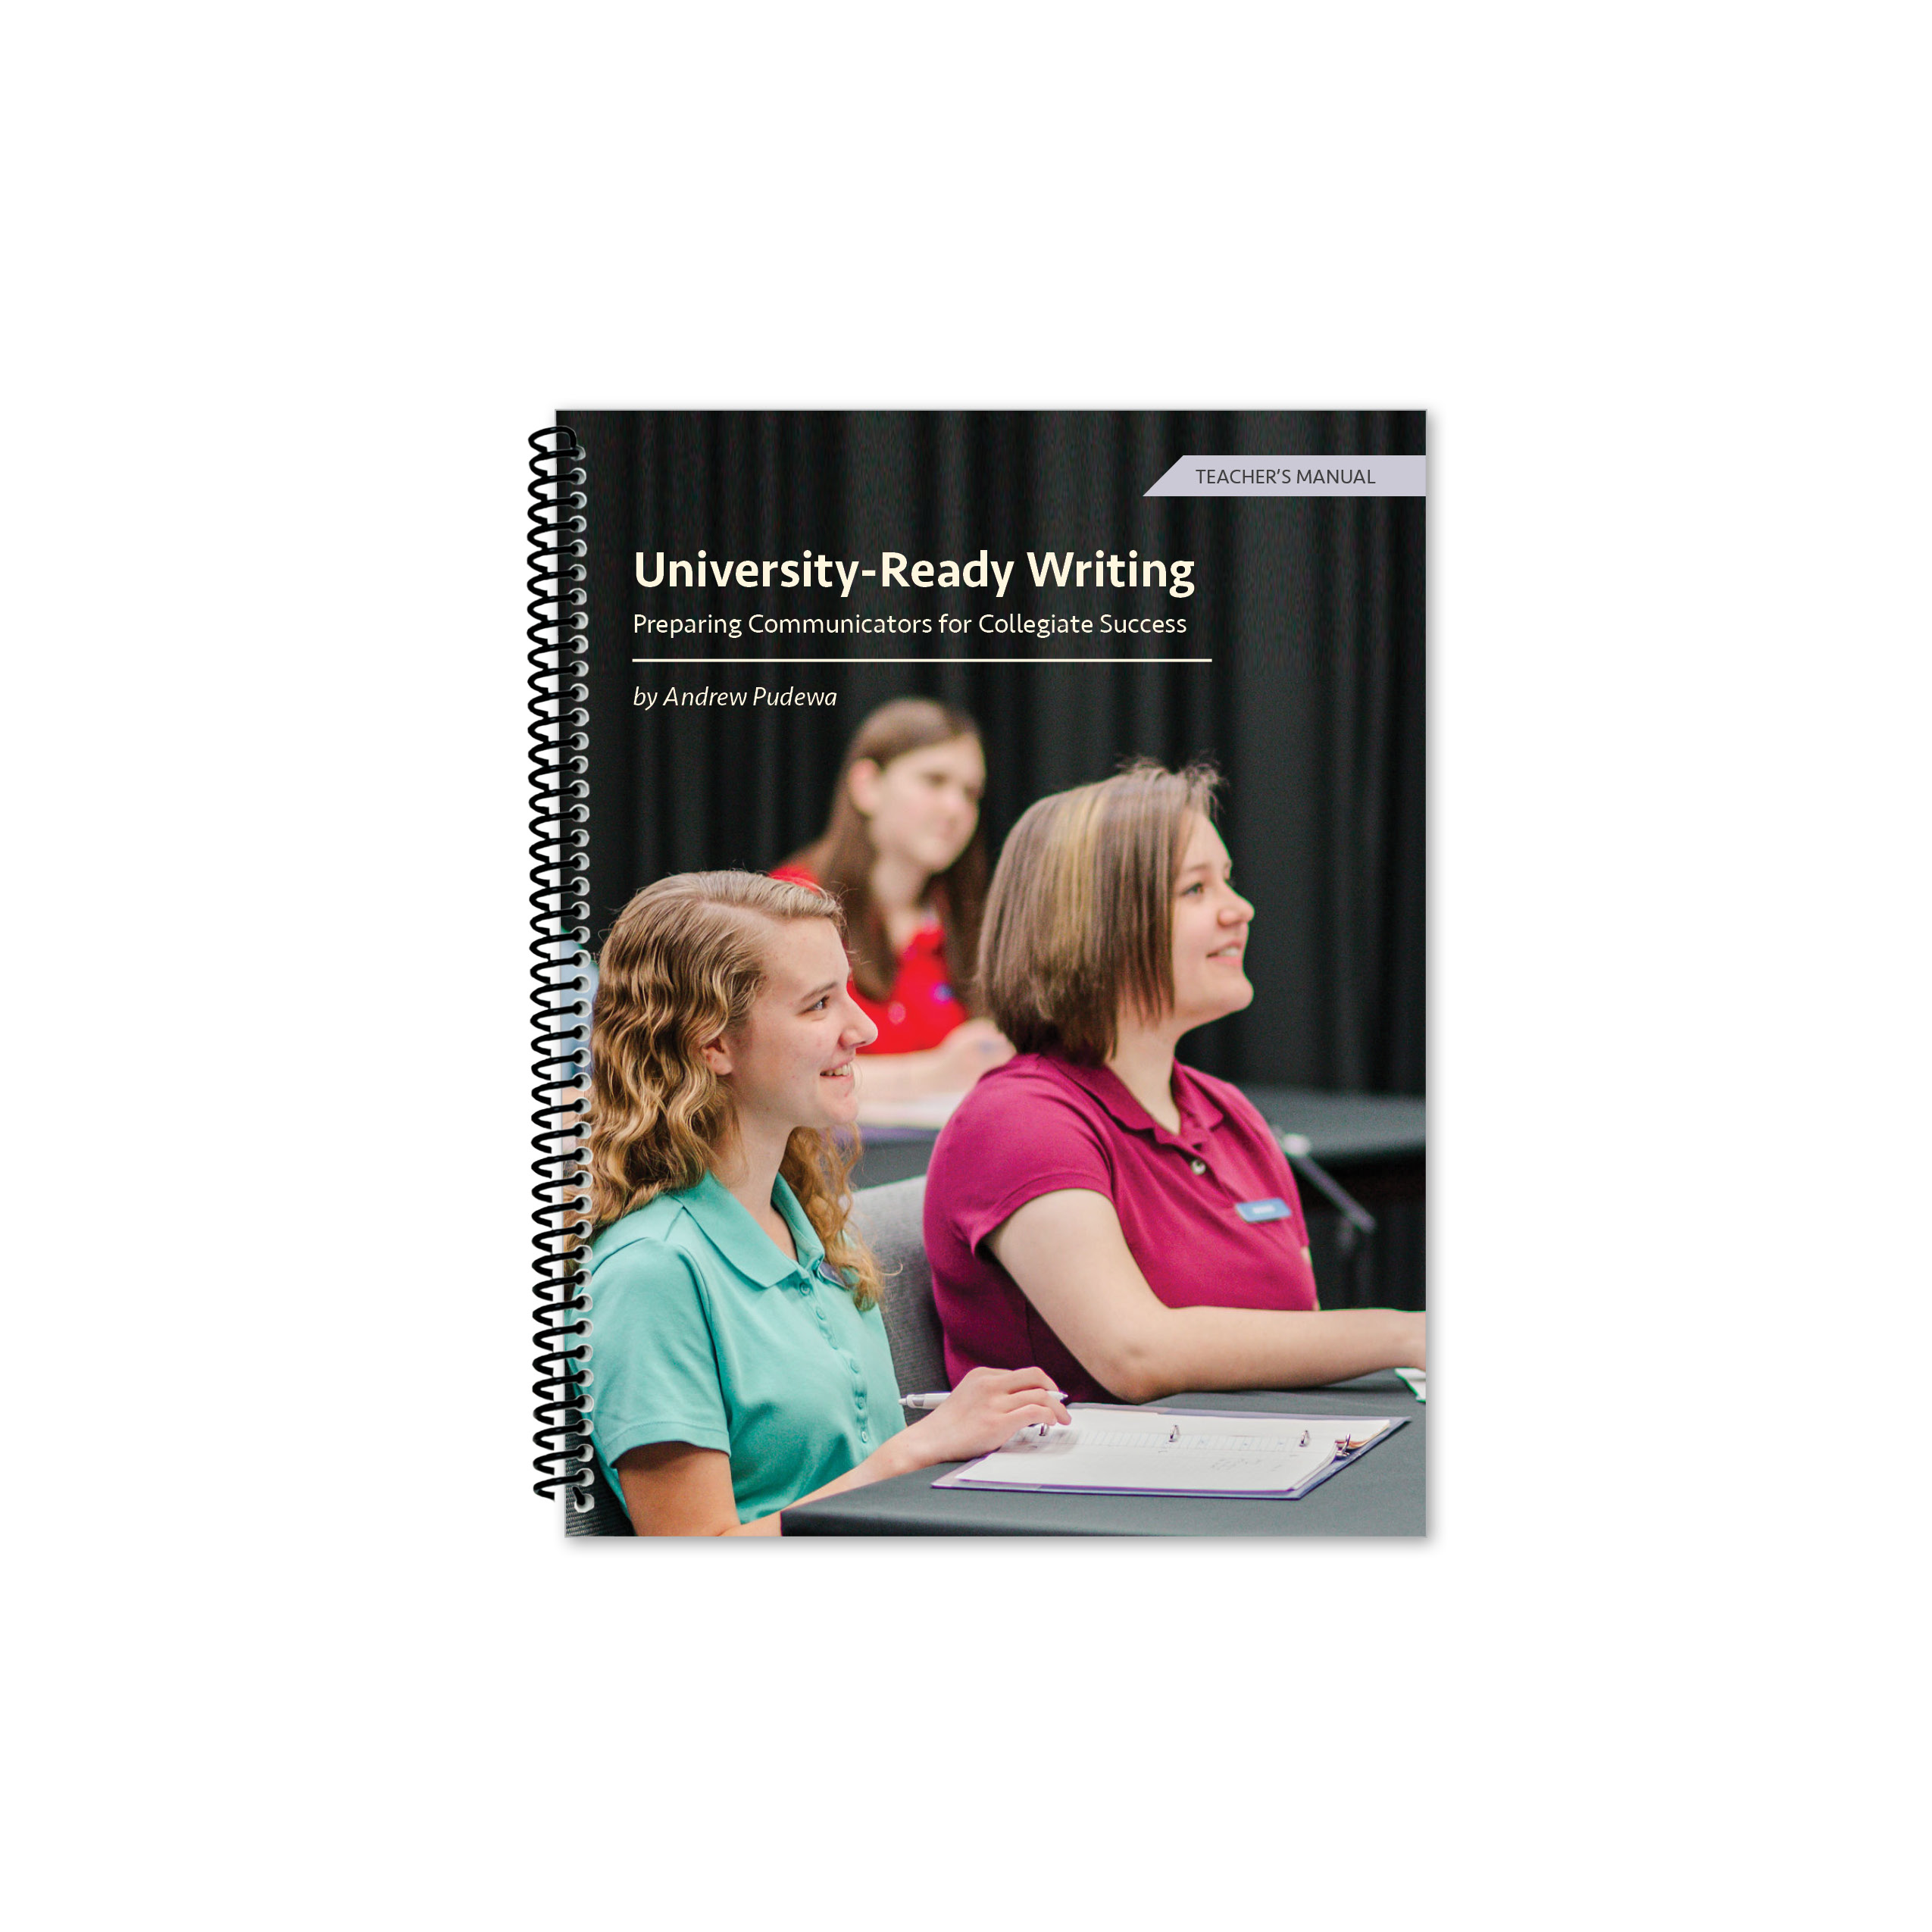 University-Ready Writing [Teacher's Manual only] [CLEARANCE]